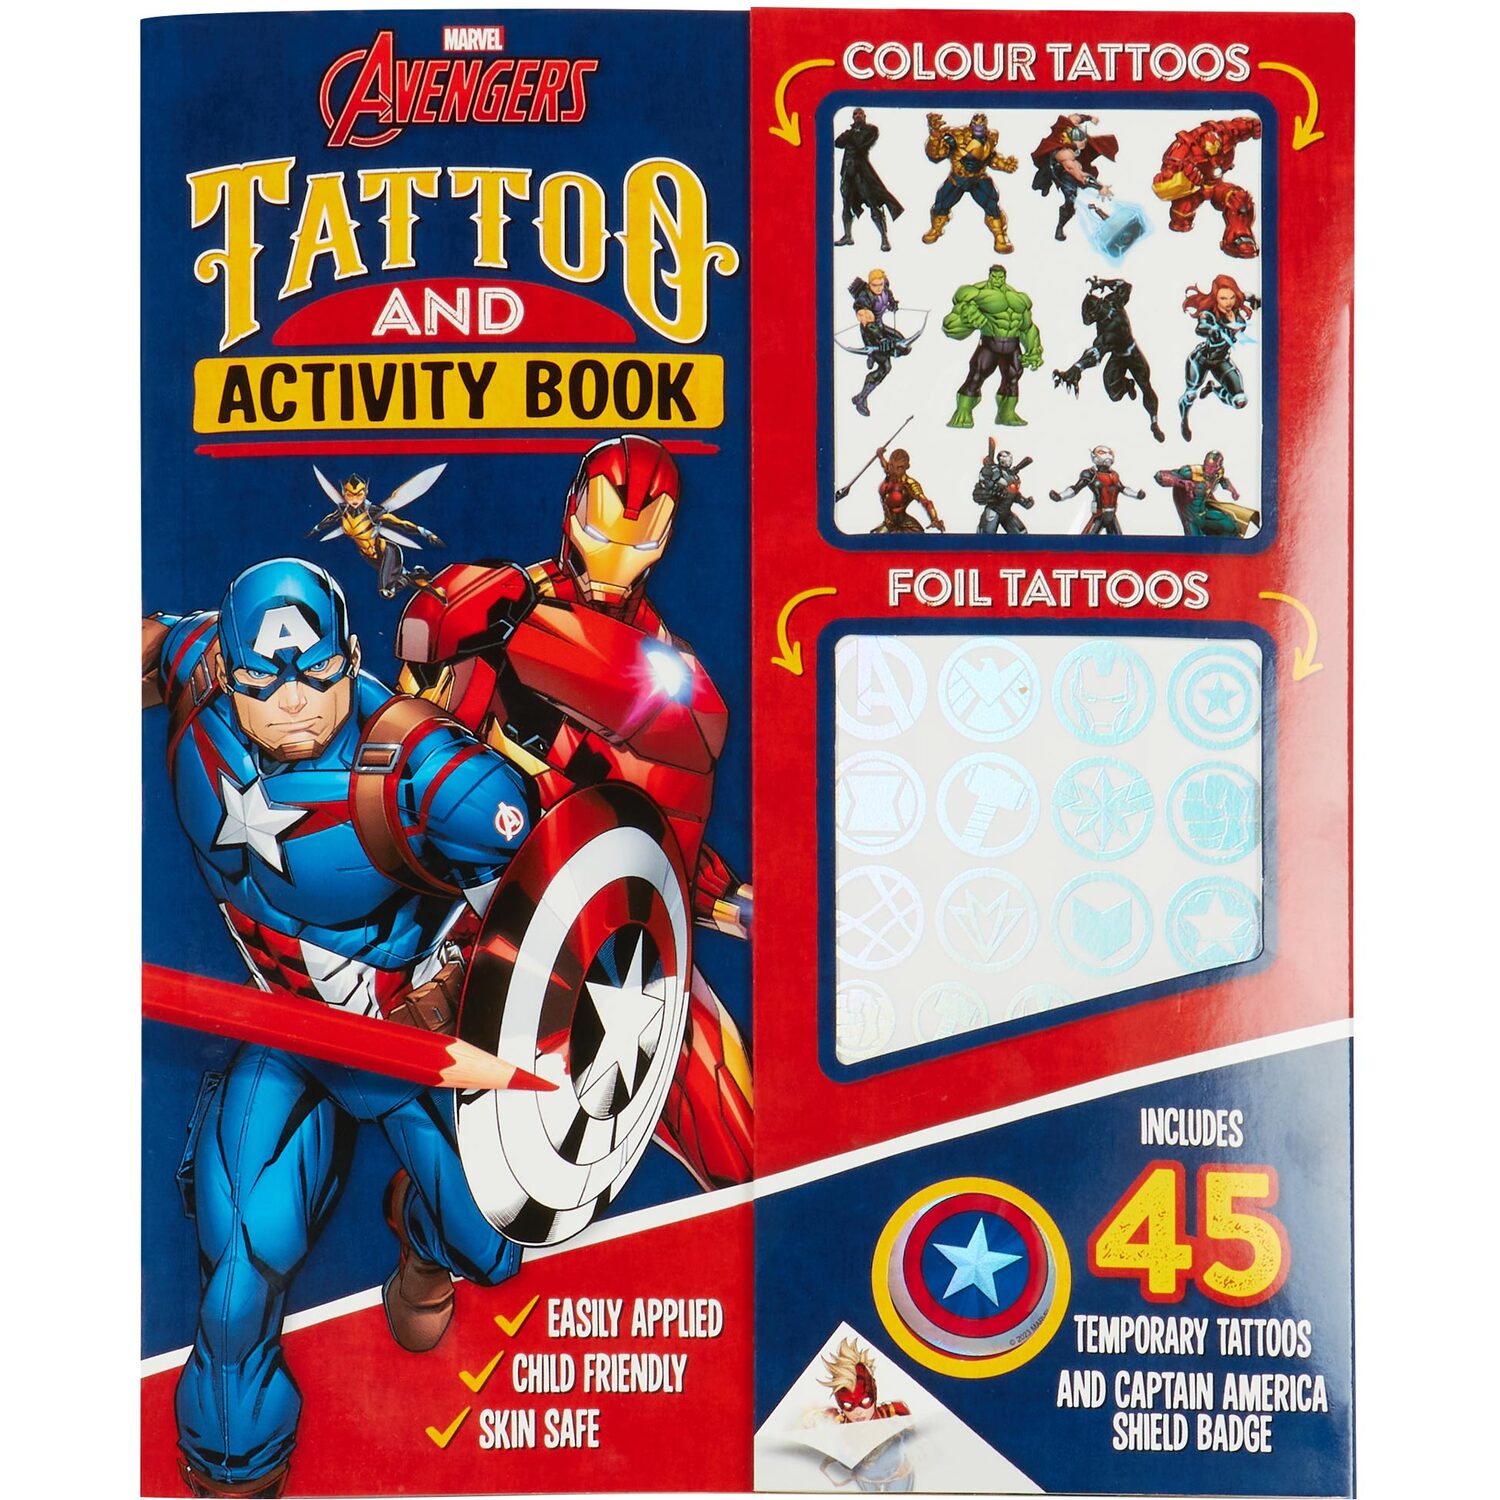 Tattoo and Activity Book Image 1